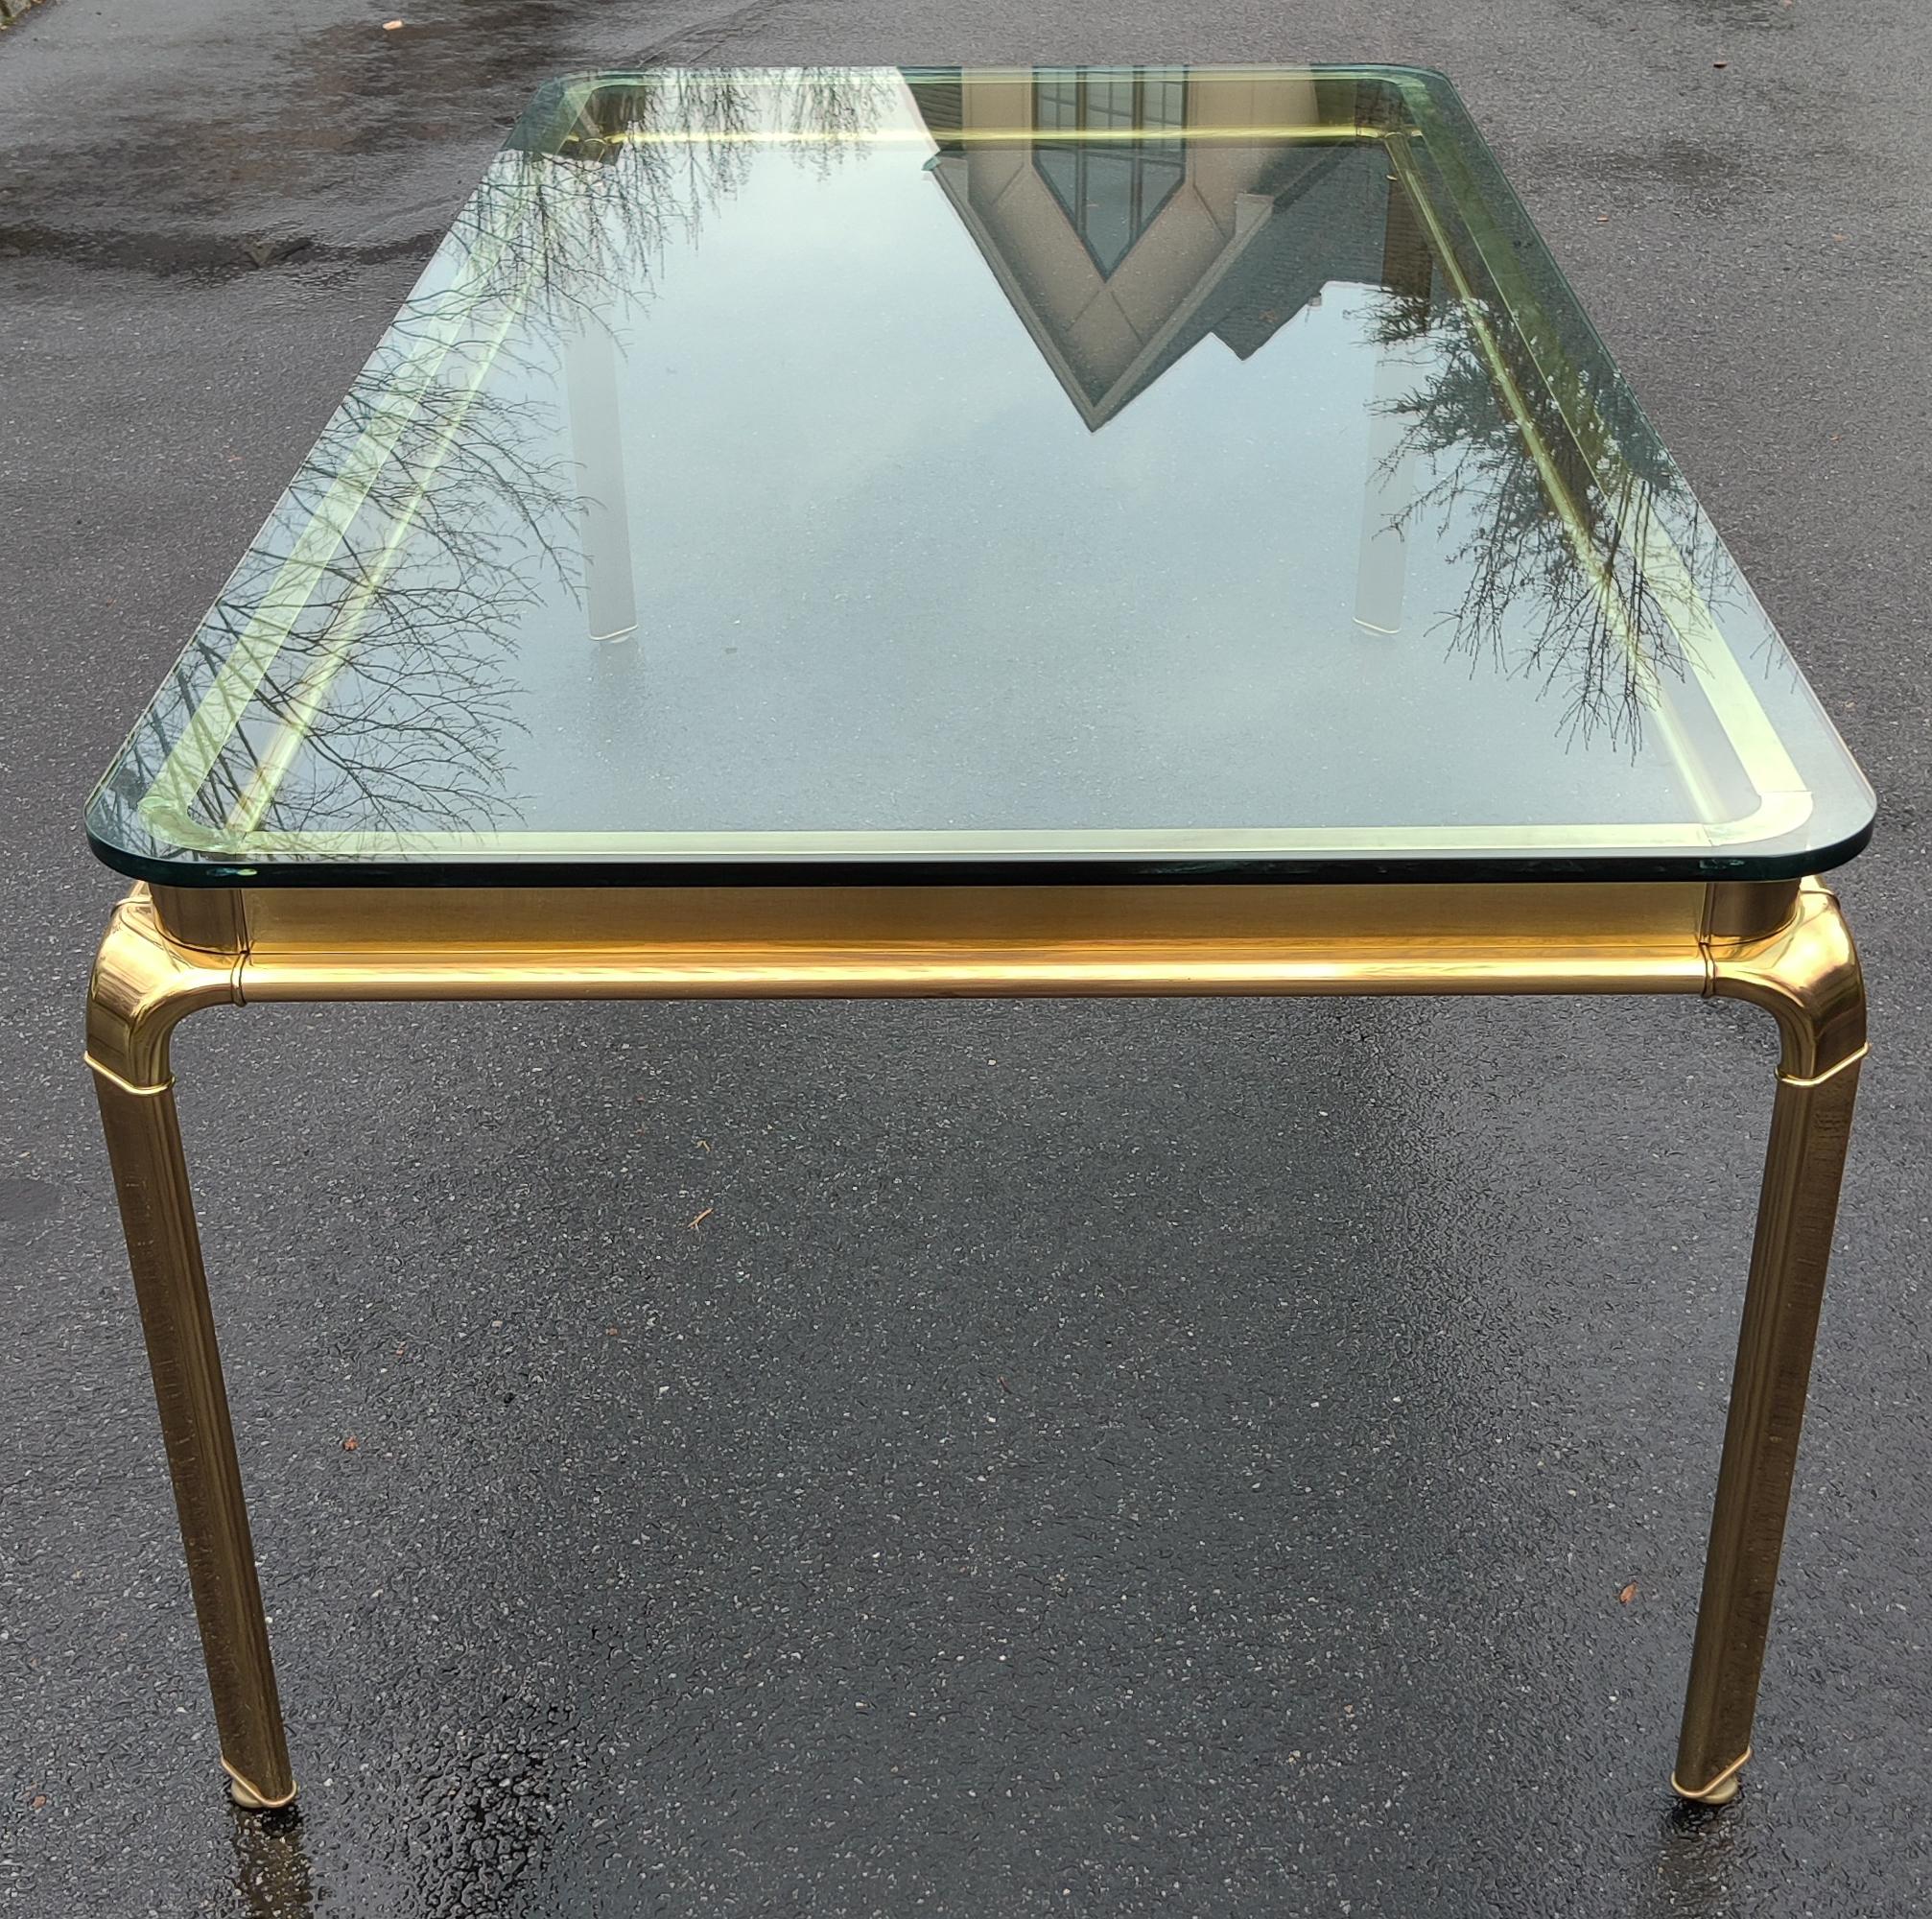 This is a premium, heirloom quality, plate-glass and antiqued-brass dining table by John Widdicomb. It is very large at nearly 90 inches long. Very heavy, and certainly imposing. The glass top is approximately 1 inch thick. The heavy and supremely